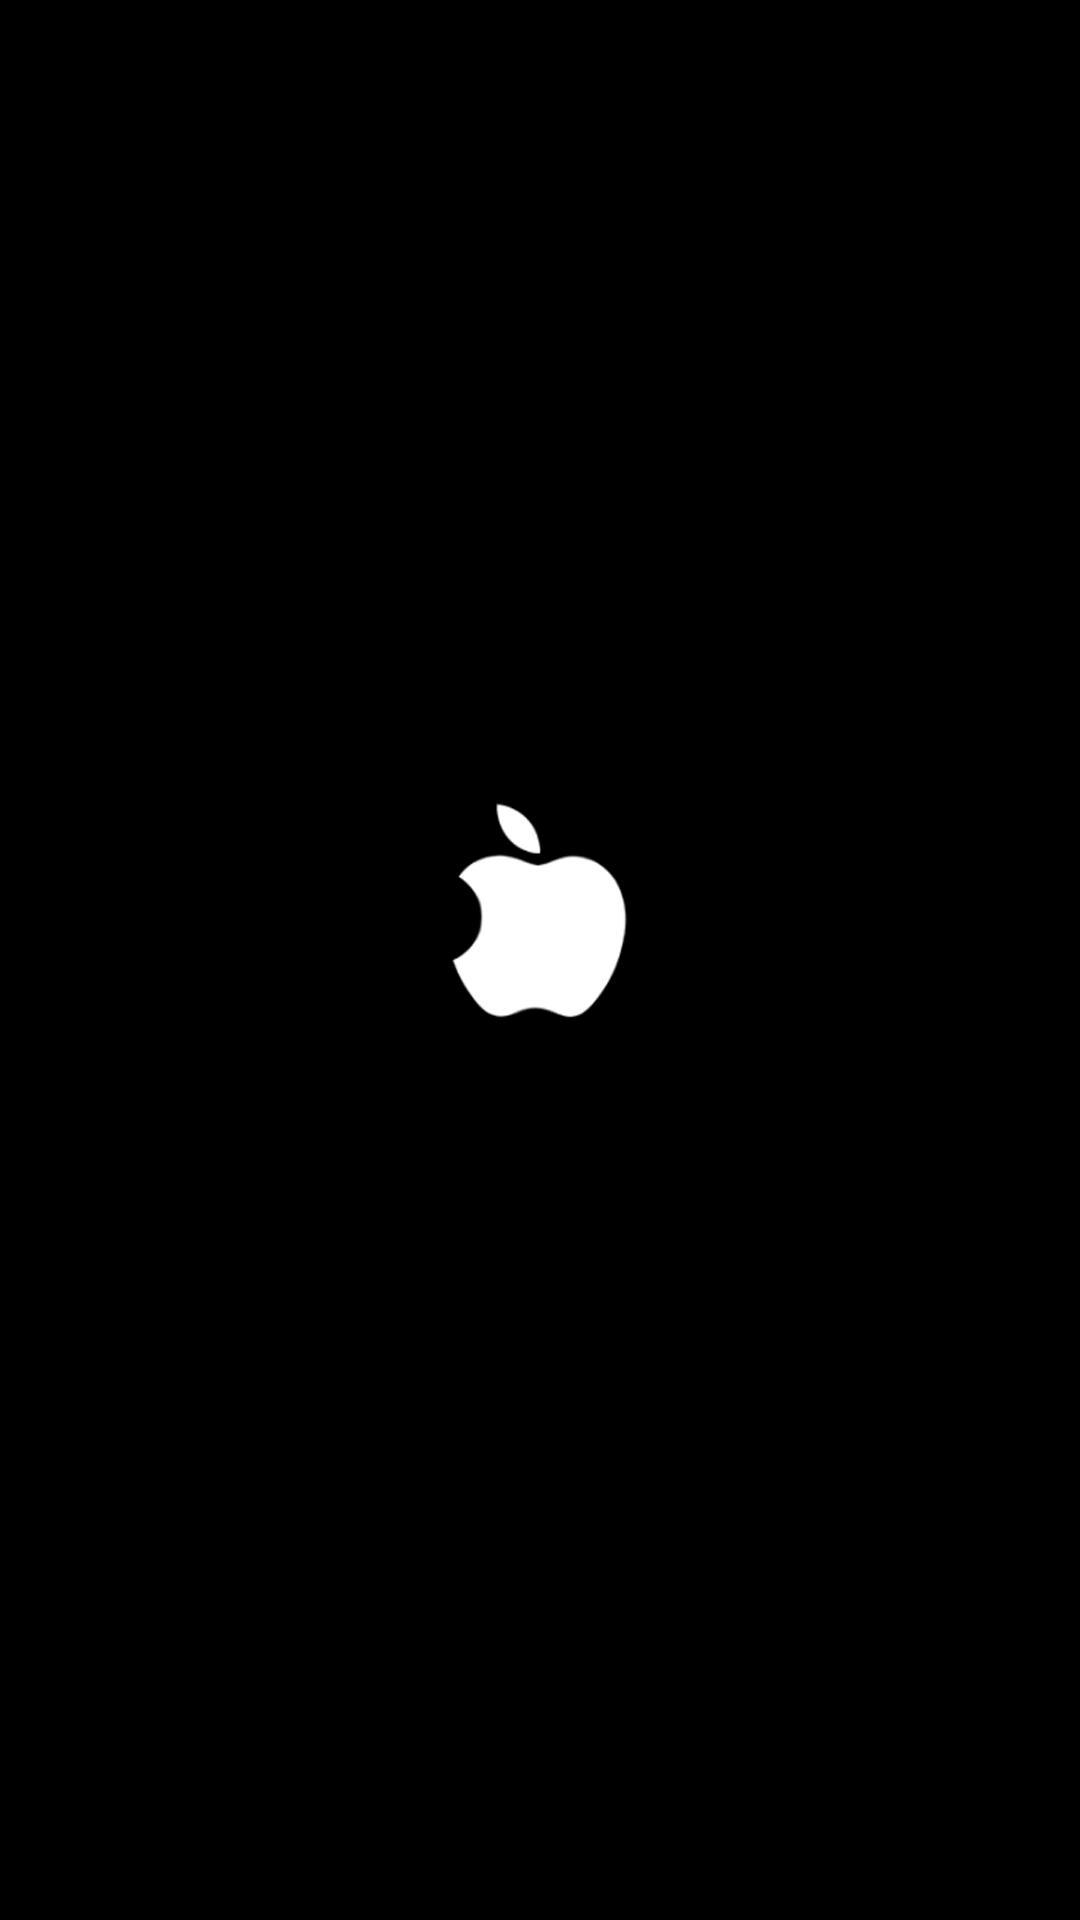 Wallpaper Black Apple For iPhone 7 resolution 1080x1920